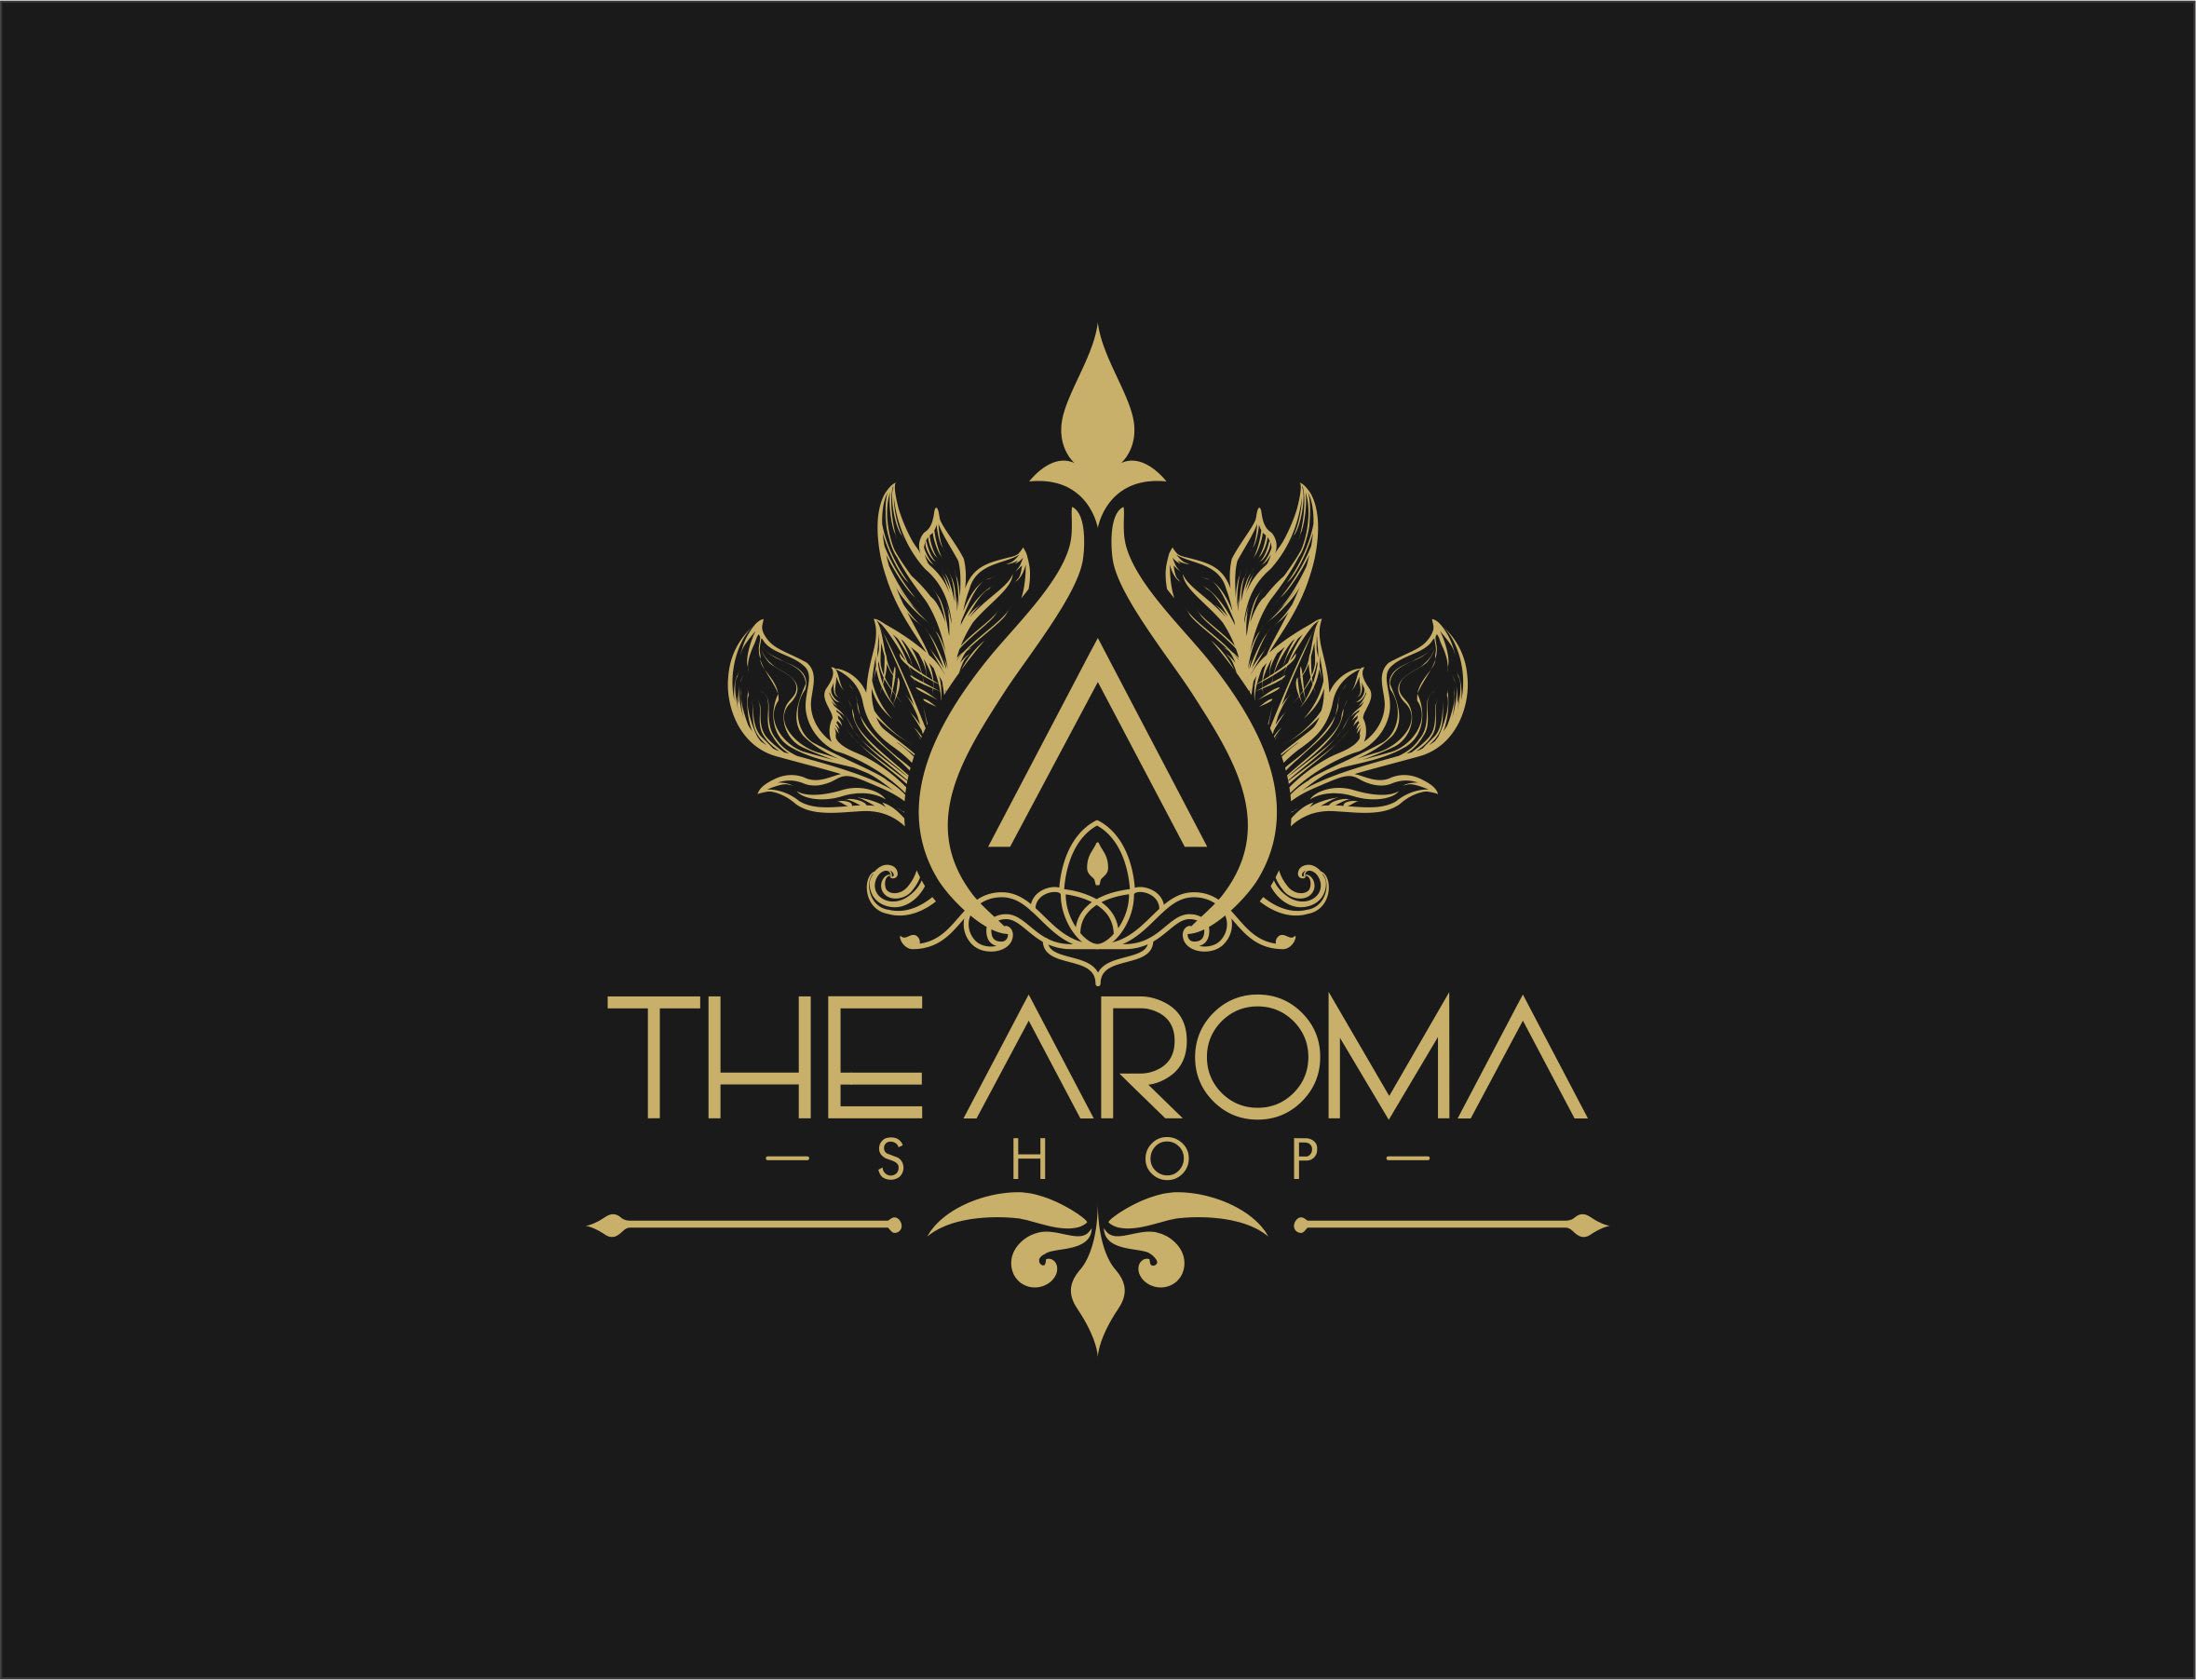 The Aroma Shop